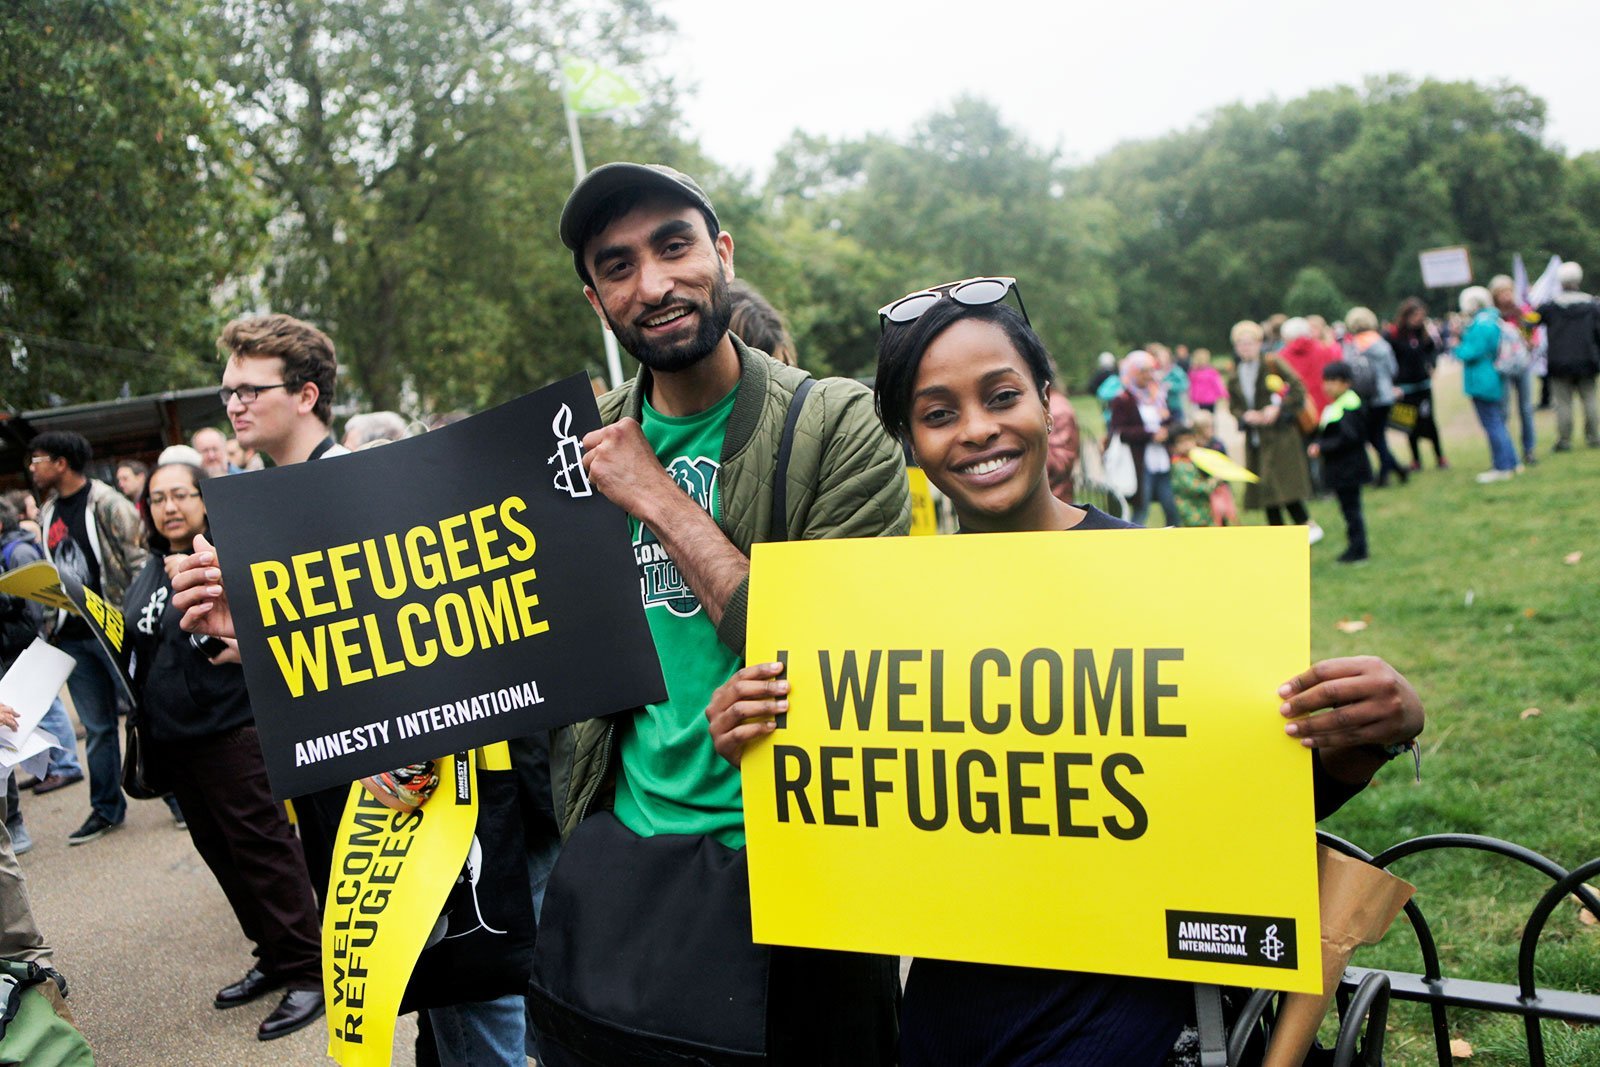 Five things you can do to refugees and asylum seekers